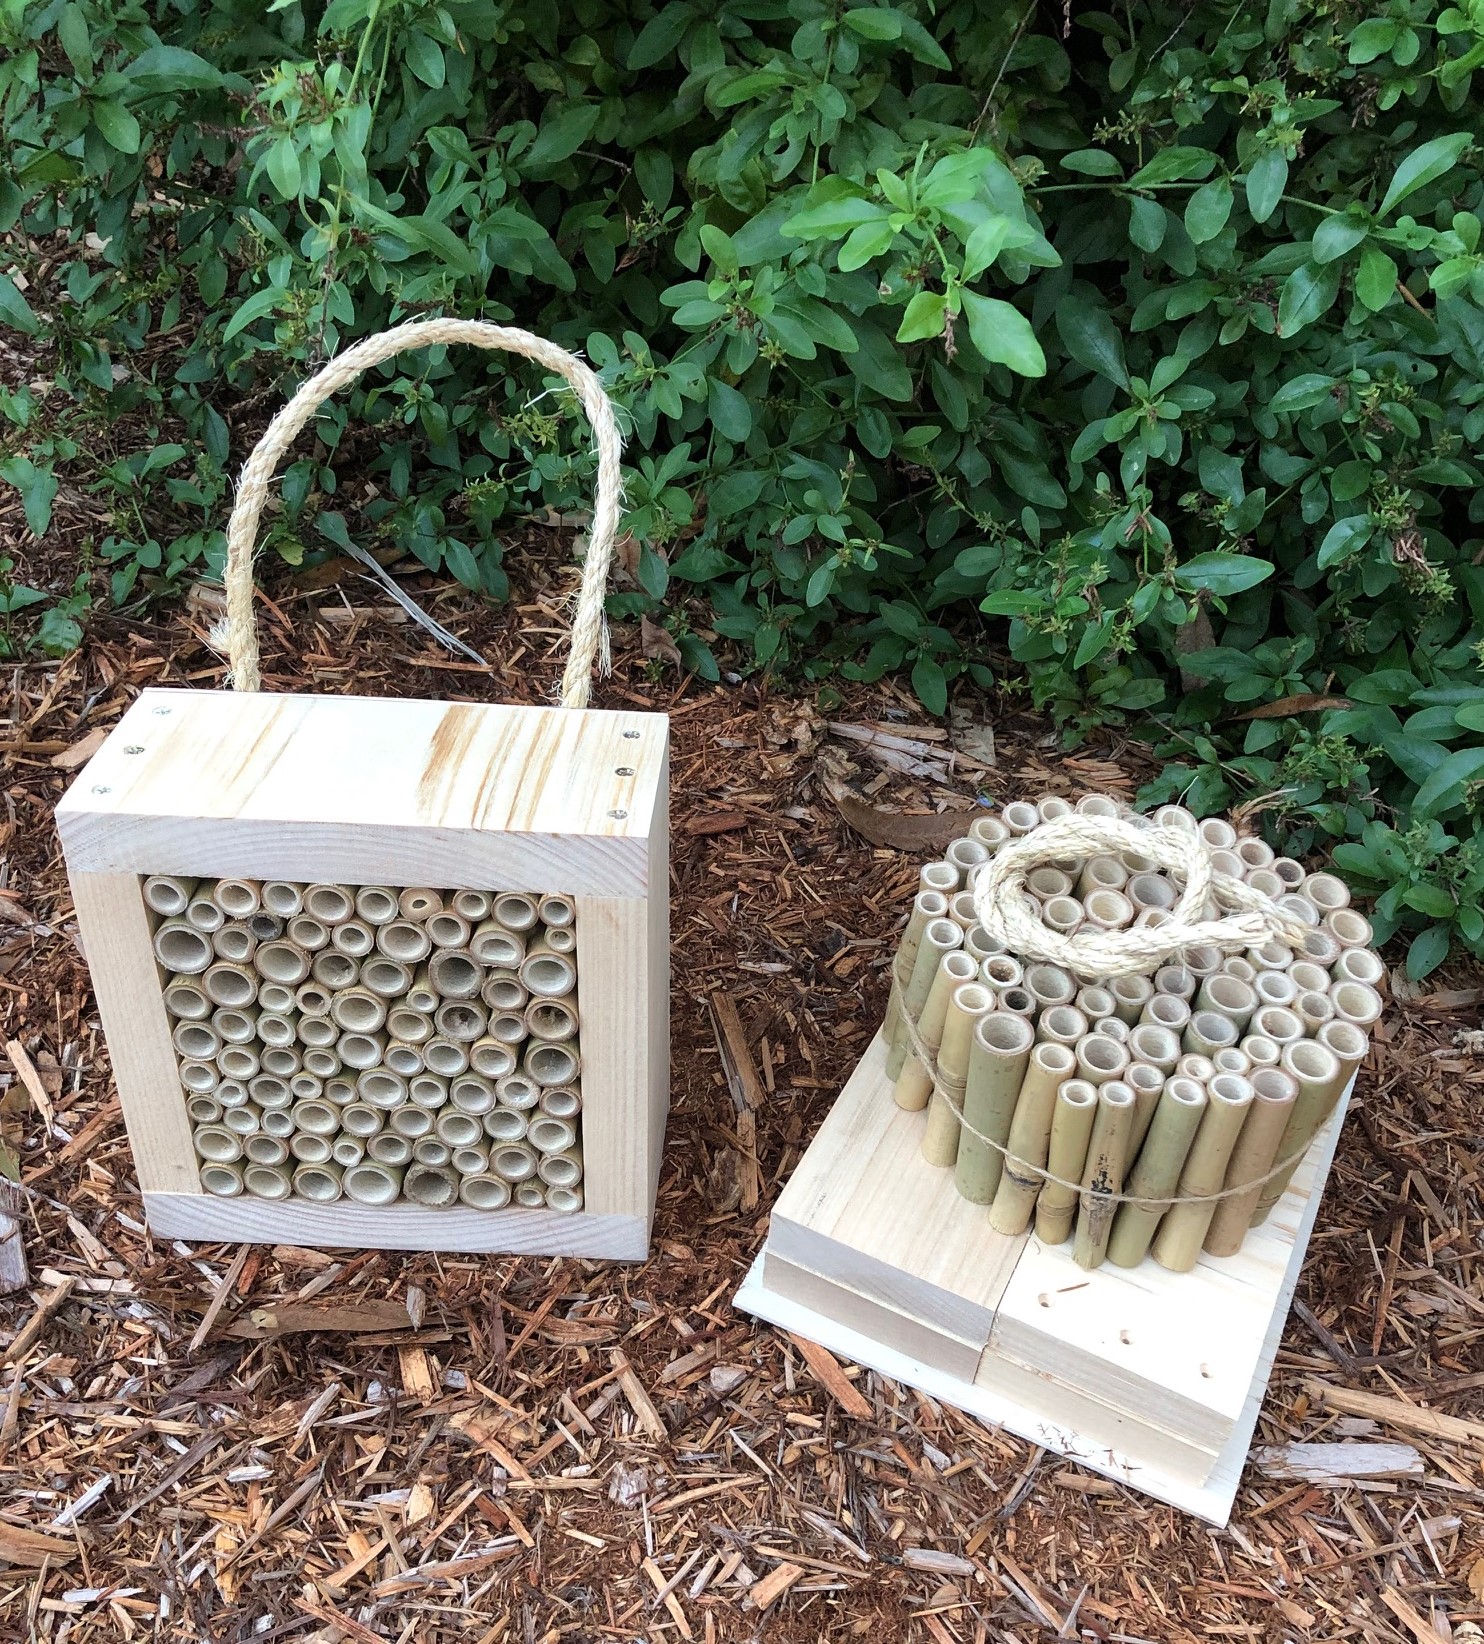 Diy Solitary Native Bee Hotel Australian Ladybird And Insect House All Bamboo Small Diy Kit Abeec Hives Australian Native Bee Hives